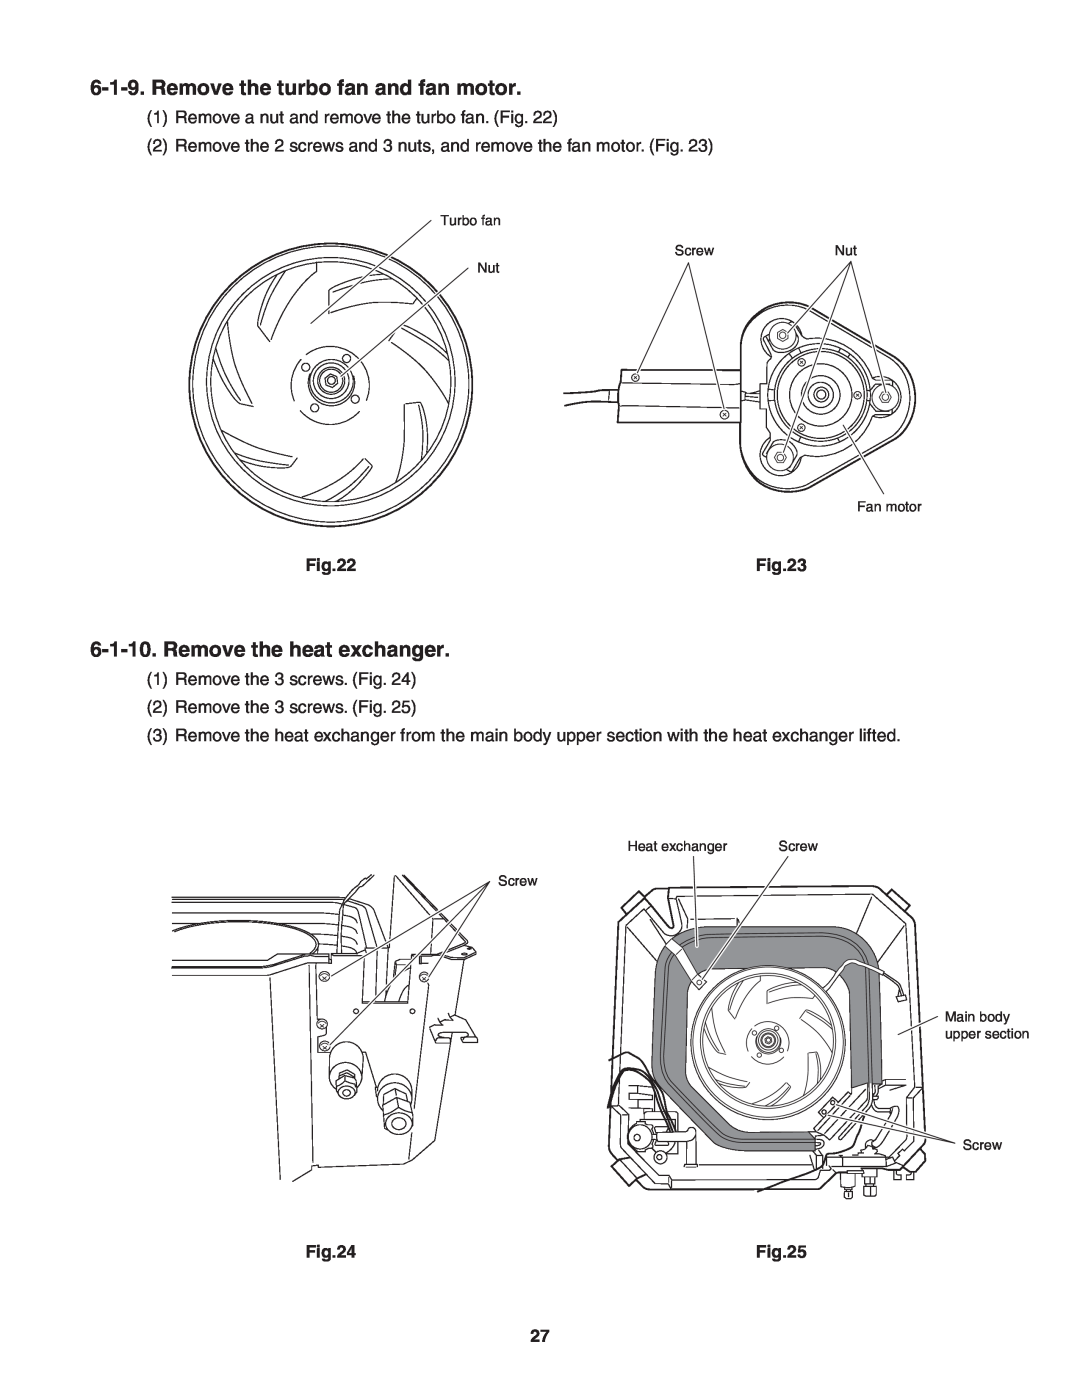 Panasonic R410A service manual Remove the turbo fan and fan motor, Remove the heat exchanger 